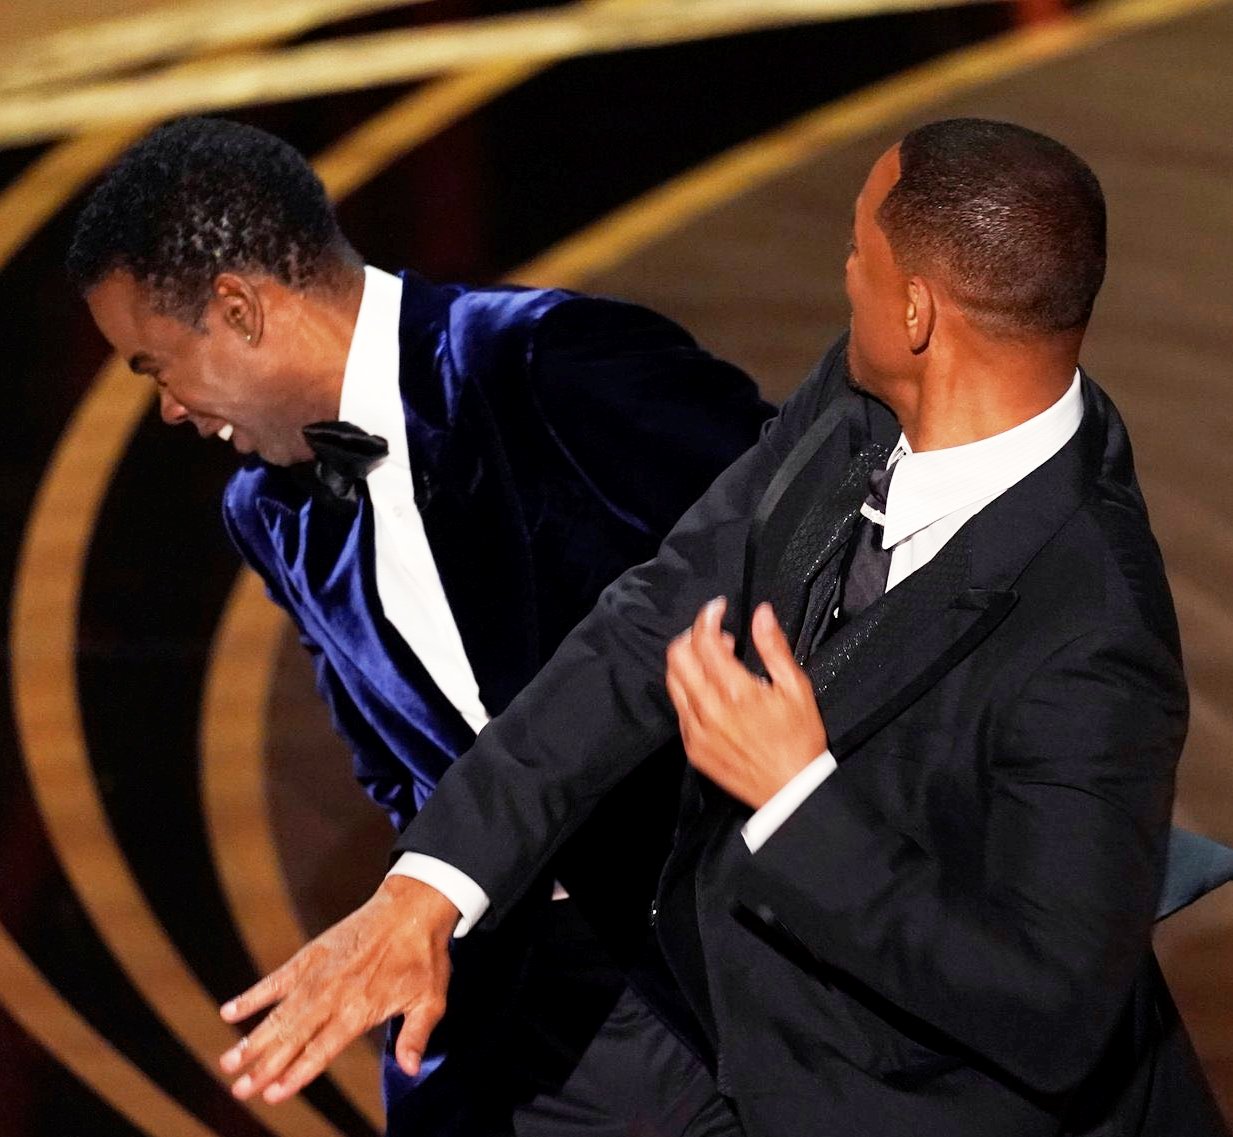 Watch Video Will Smith slaps Chris Rock at Oscars 2022 on Live TV